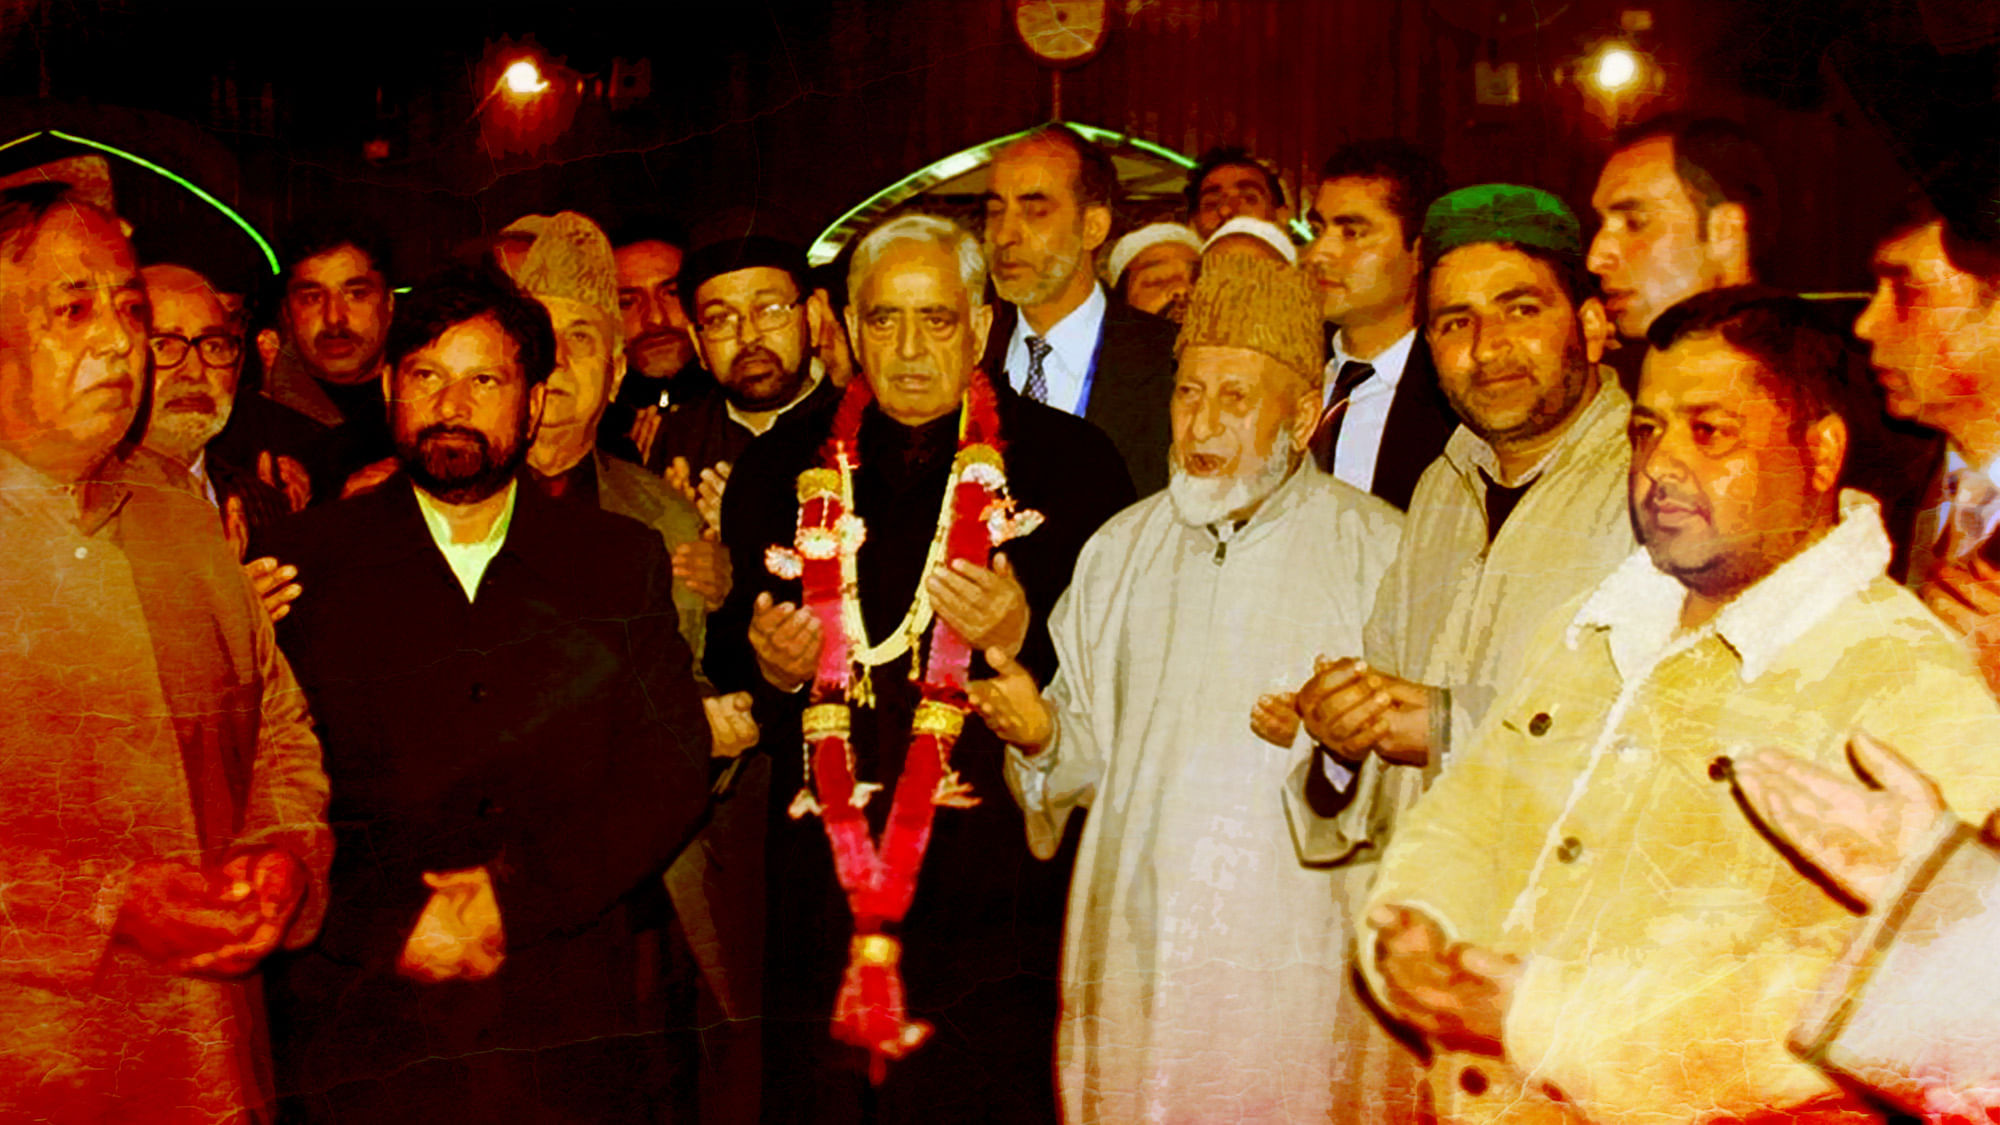 A state as complicated as Jammu and Kashmir required Mufti <i>sahib’s</i> vast political experience, his unflinching advocacy of India-Pakistan dialogue and his love for the people of the state. (Photo Courtesy: <a href="https://www.facebook.com/Muftimohammadsayeed/photos/pb.1411239649188257.-2207520000.1452242392./1456219904690231/?type=3&amp;theater">Facebook</a>/Altered by <b>The Quint</b>)